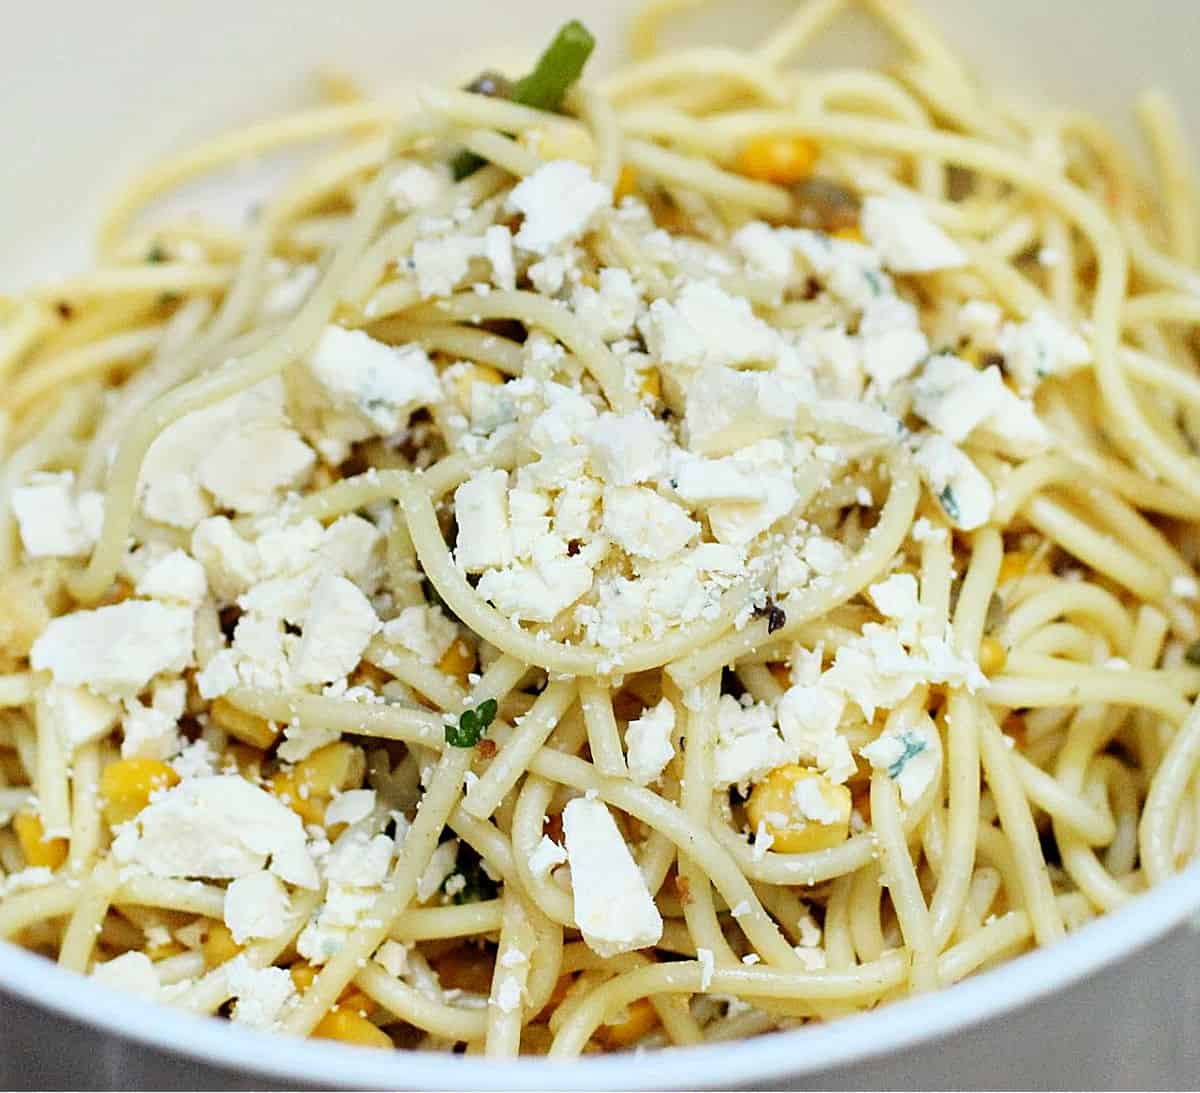 Spaghetti with cheese pieces in a white plastic bowl